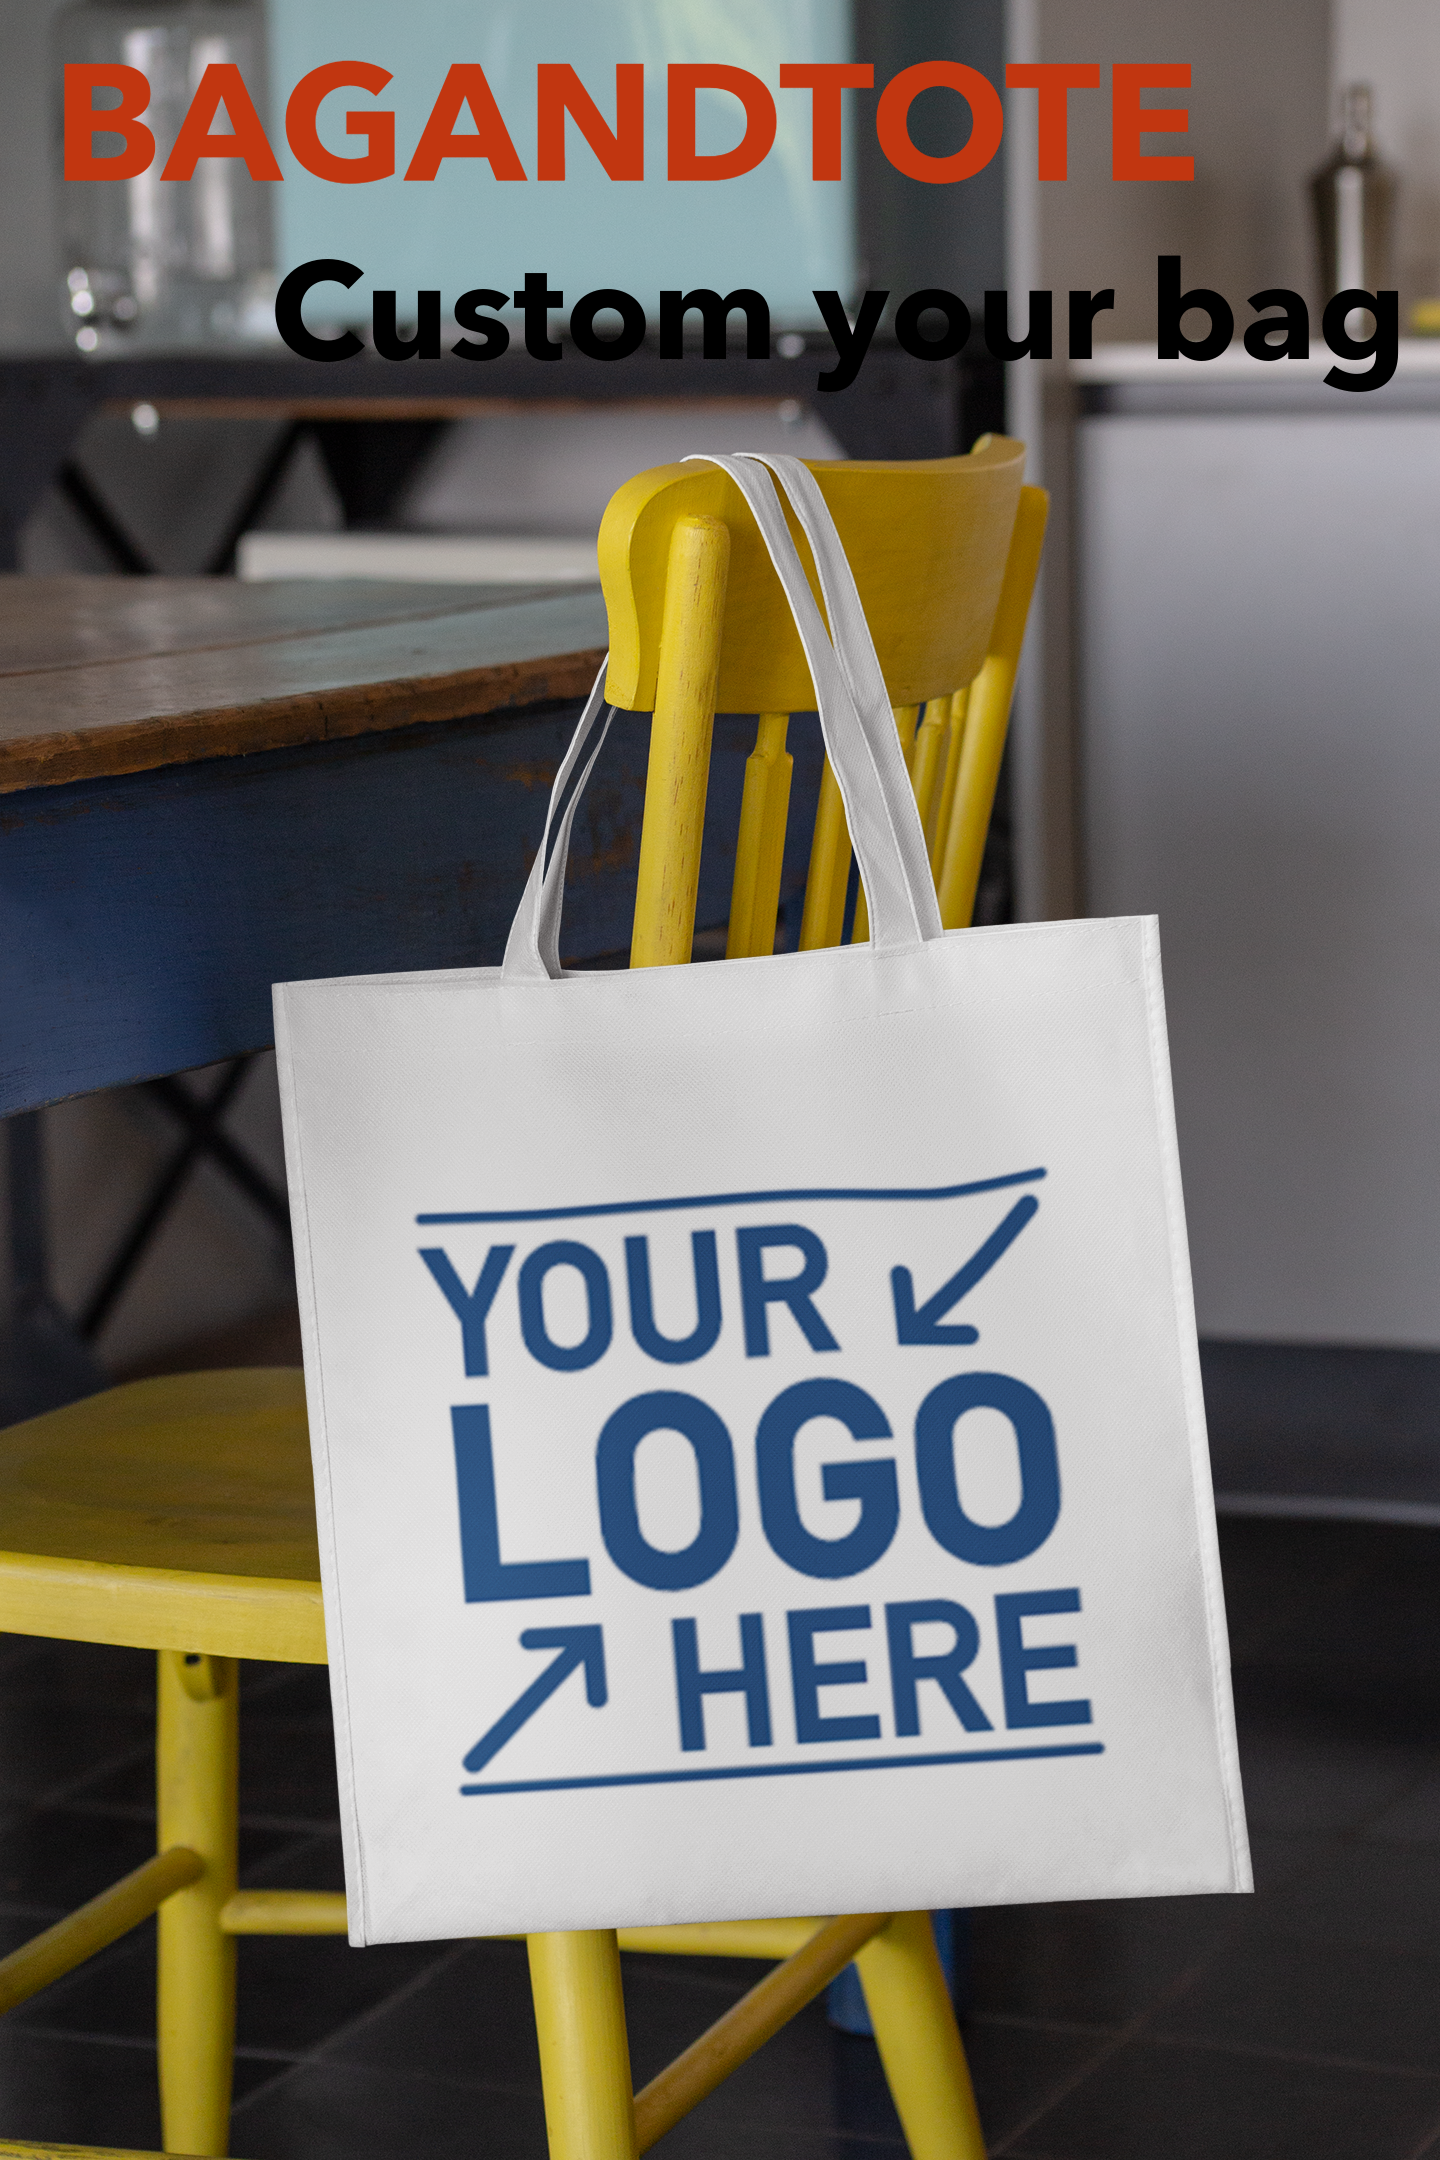 https://cdn.shopify.com/s/files/1/2671/4086/articles/grocery-bag-mockup-hanging-from-a-chair-in-a-kitchen-27616.png?v=1583395925